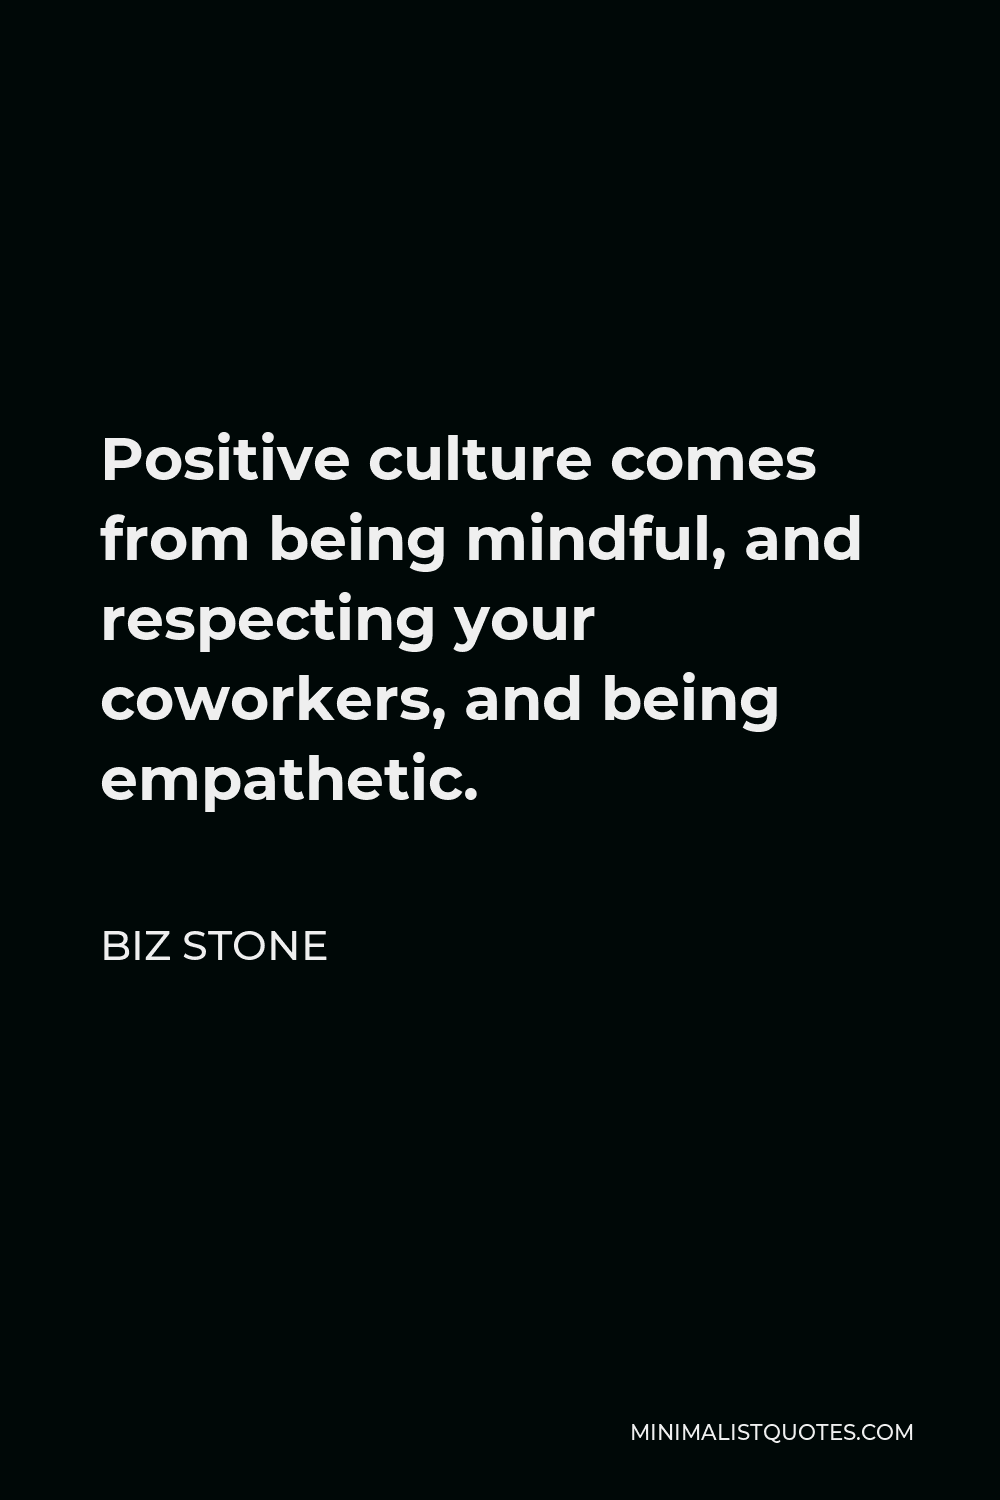 Biz Stone Quote - Positive culture comes from being mindful, and respecting your coworkers, and being empathetic.